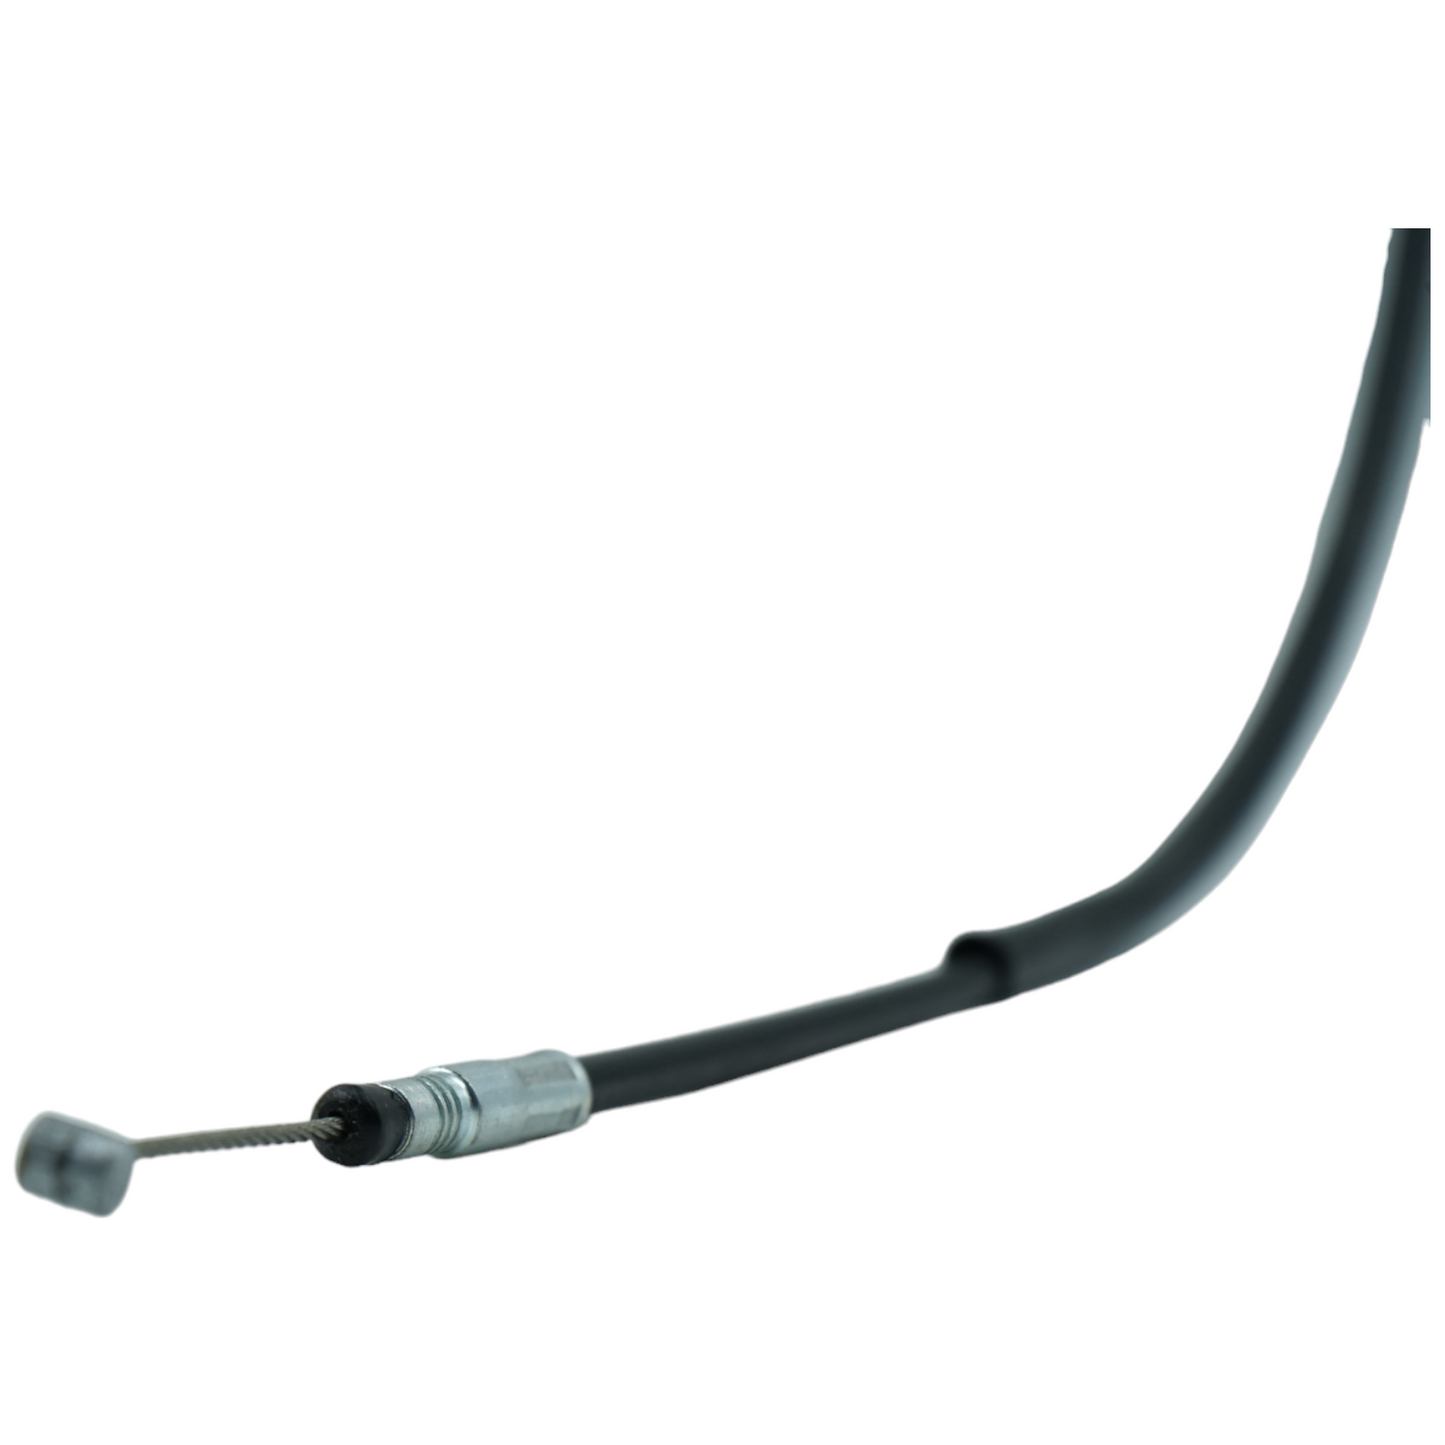 New Replacement Choke Cable Fits Honda TRX300 FW Fourtrax 1996-2000 4x4